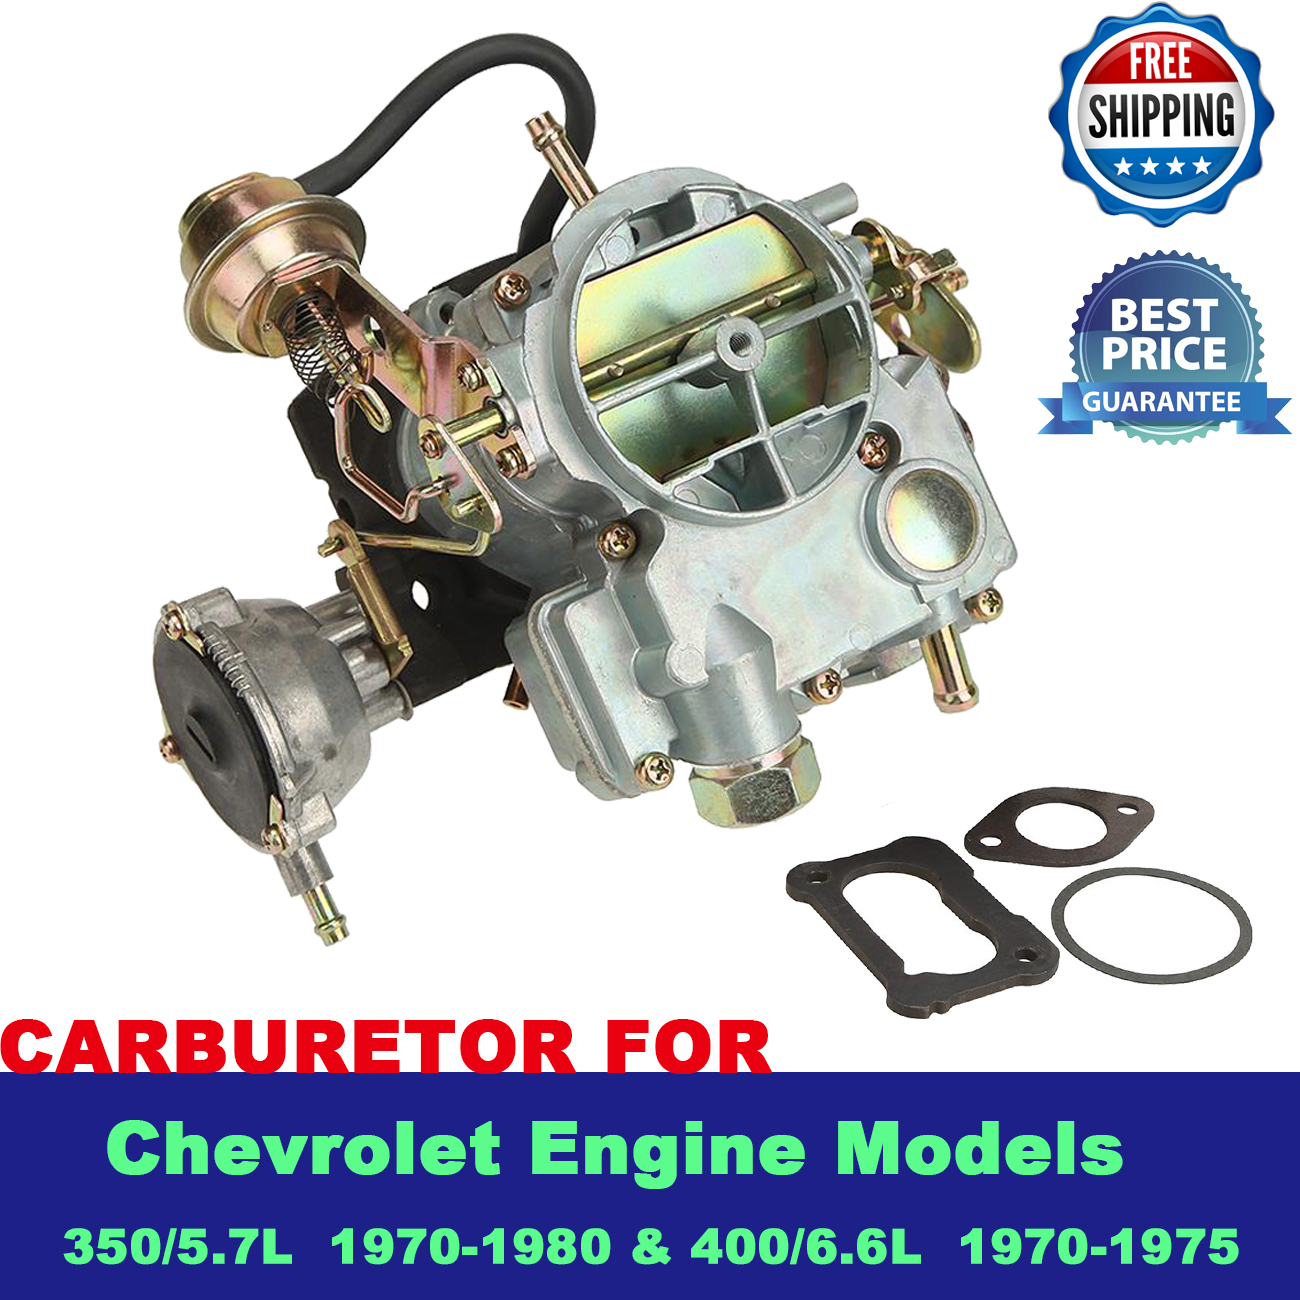 CARBURETOR CARB TYPE ROCHESTER 2GC 2 BARREL FIT FOR CHEVROLET ENGN 350 400 CHEVY